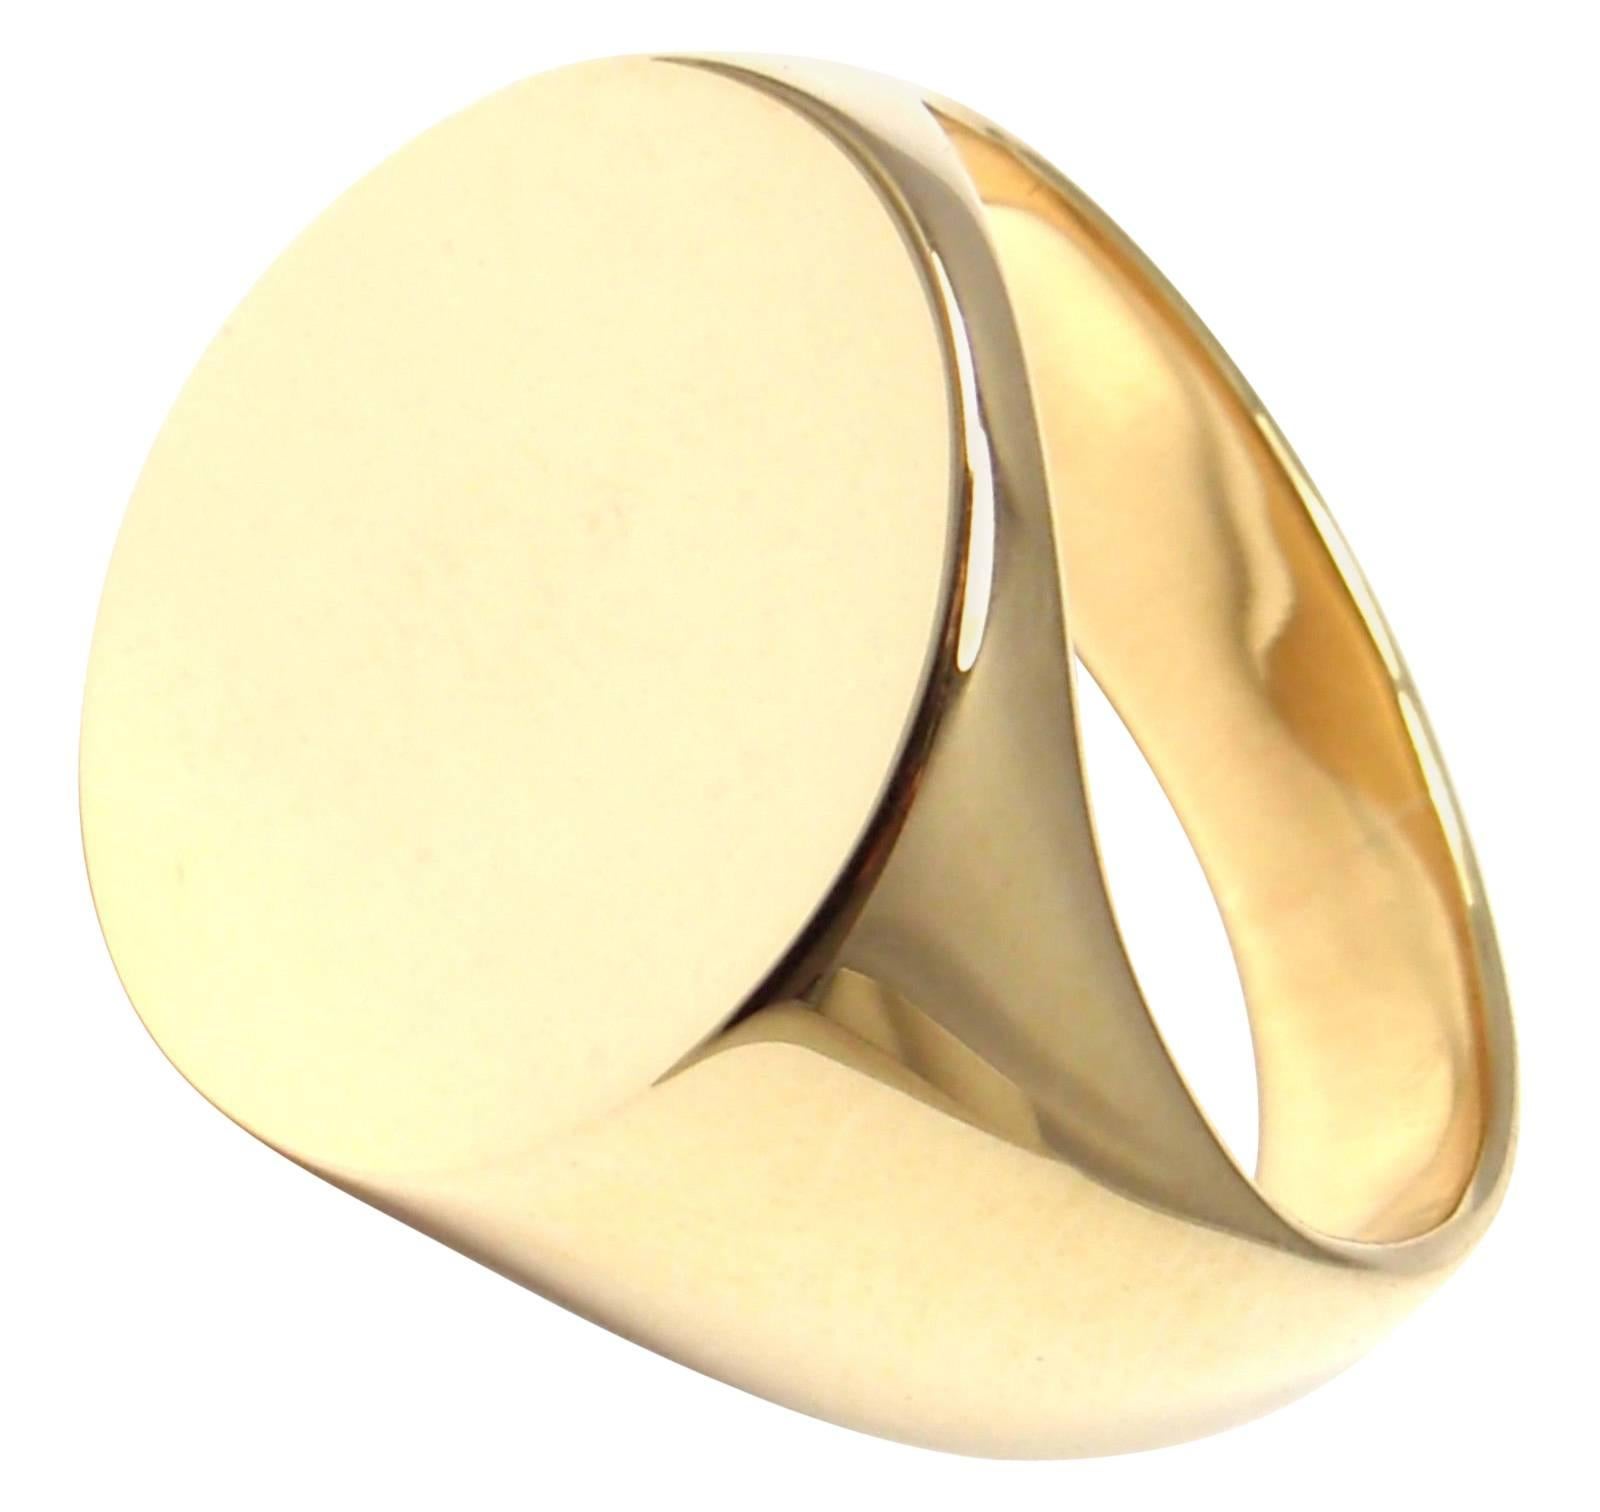 Vintage Cartier Oval Shape Signet Yellow Gold Ring